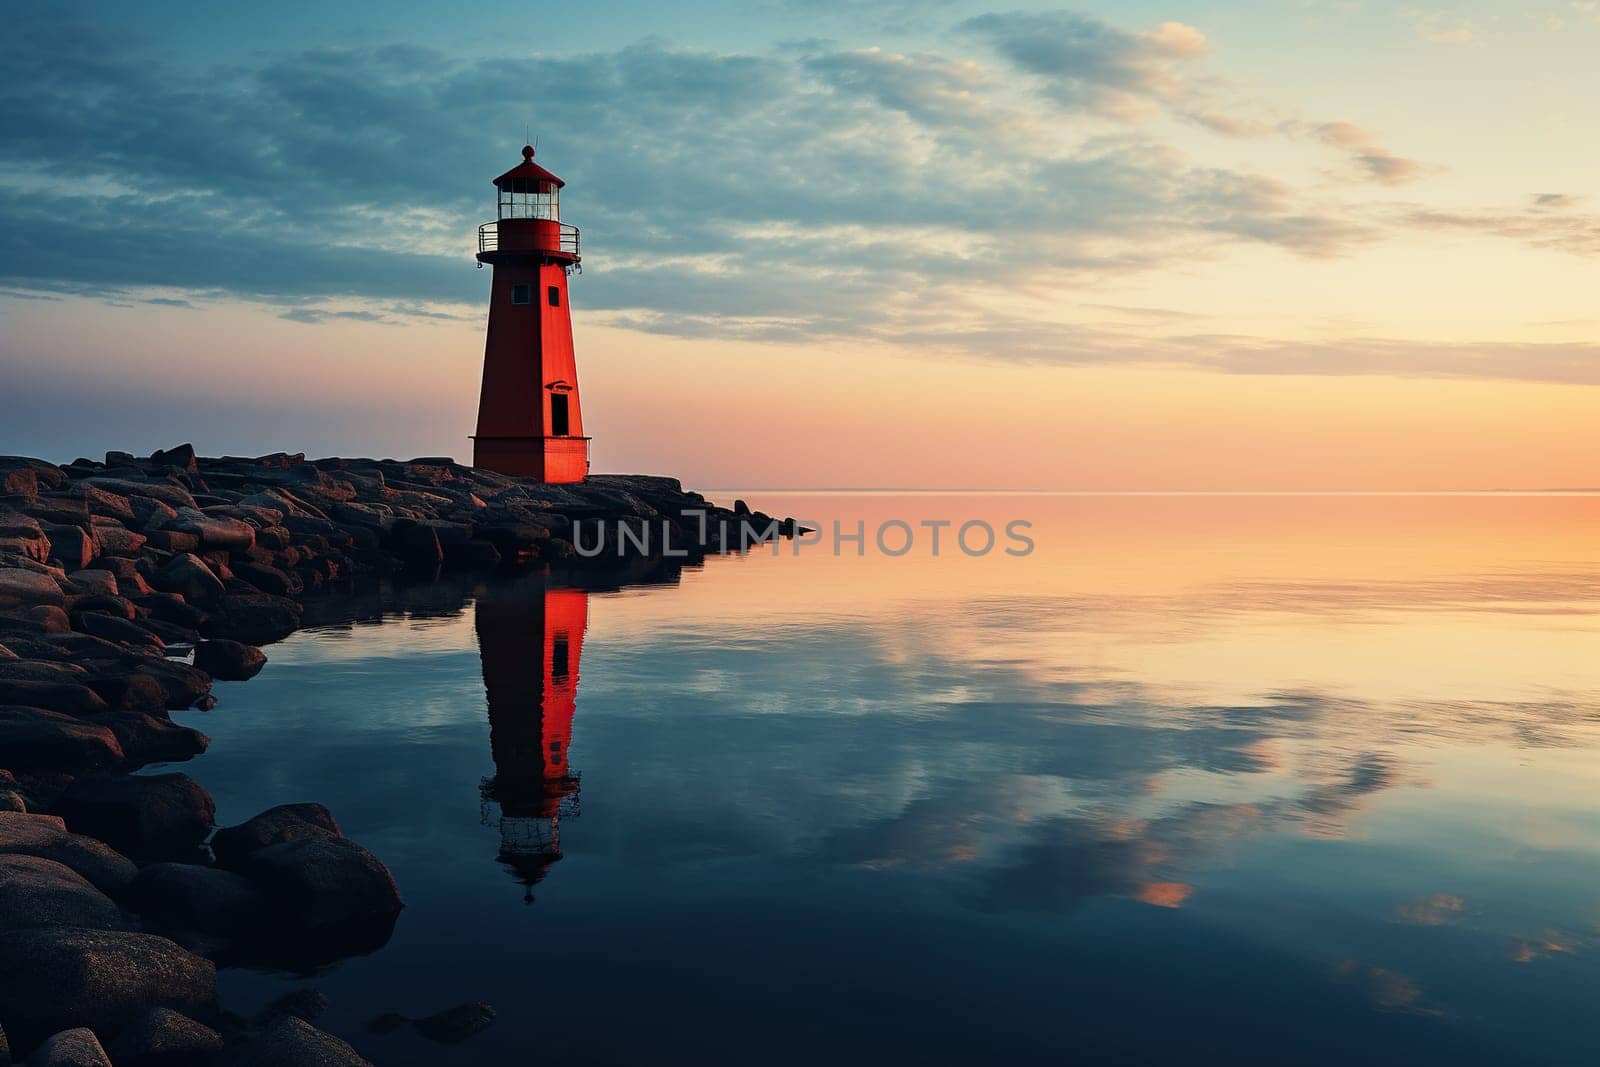 Lighthouse on the seashore, beautiful landscape. Seascape, signal building on the seashore. Coastal landscape with a lighthouse.